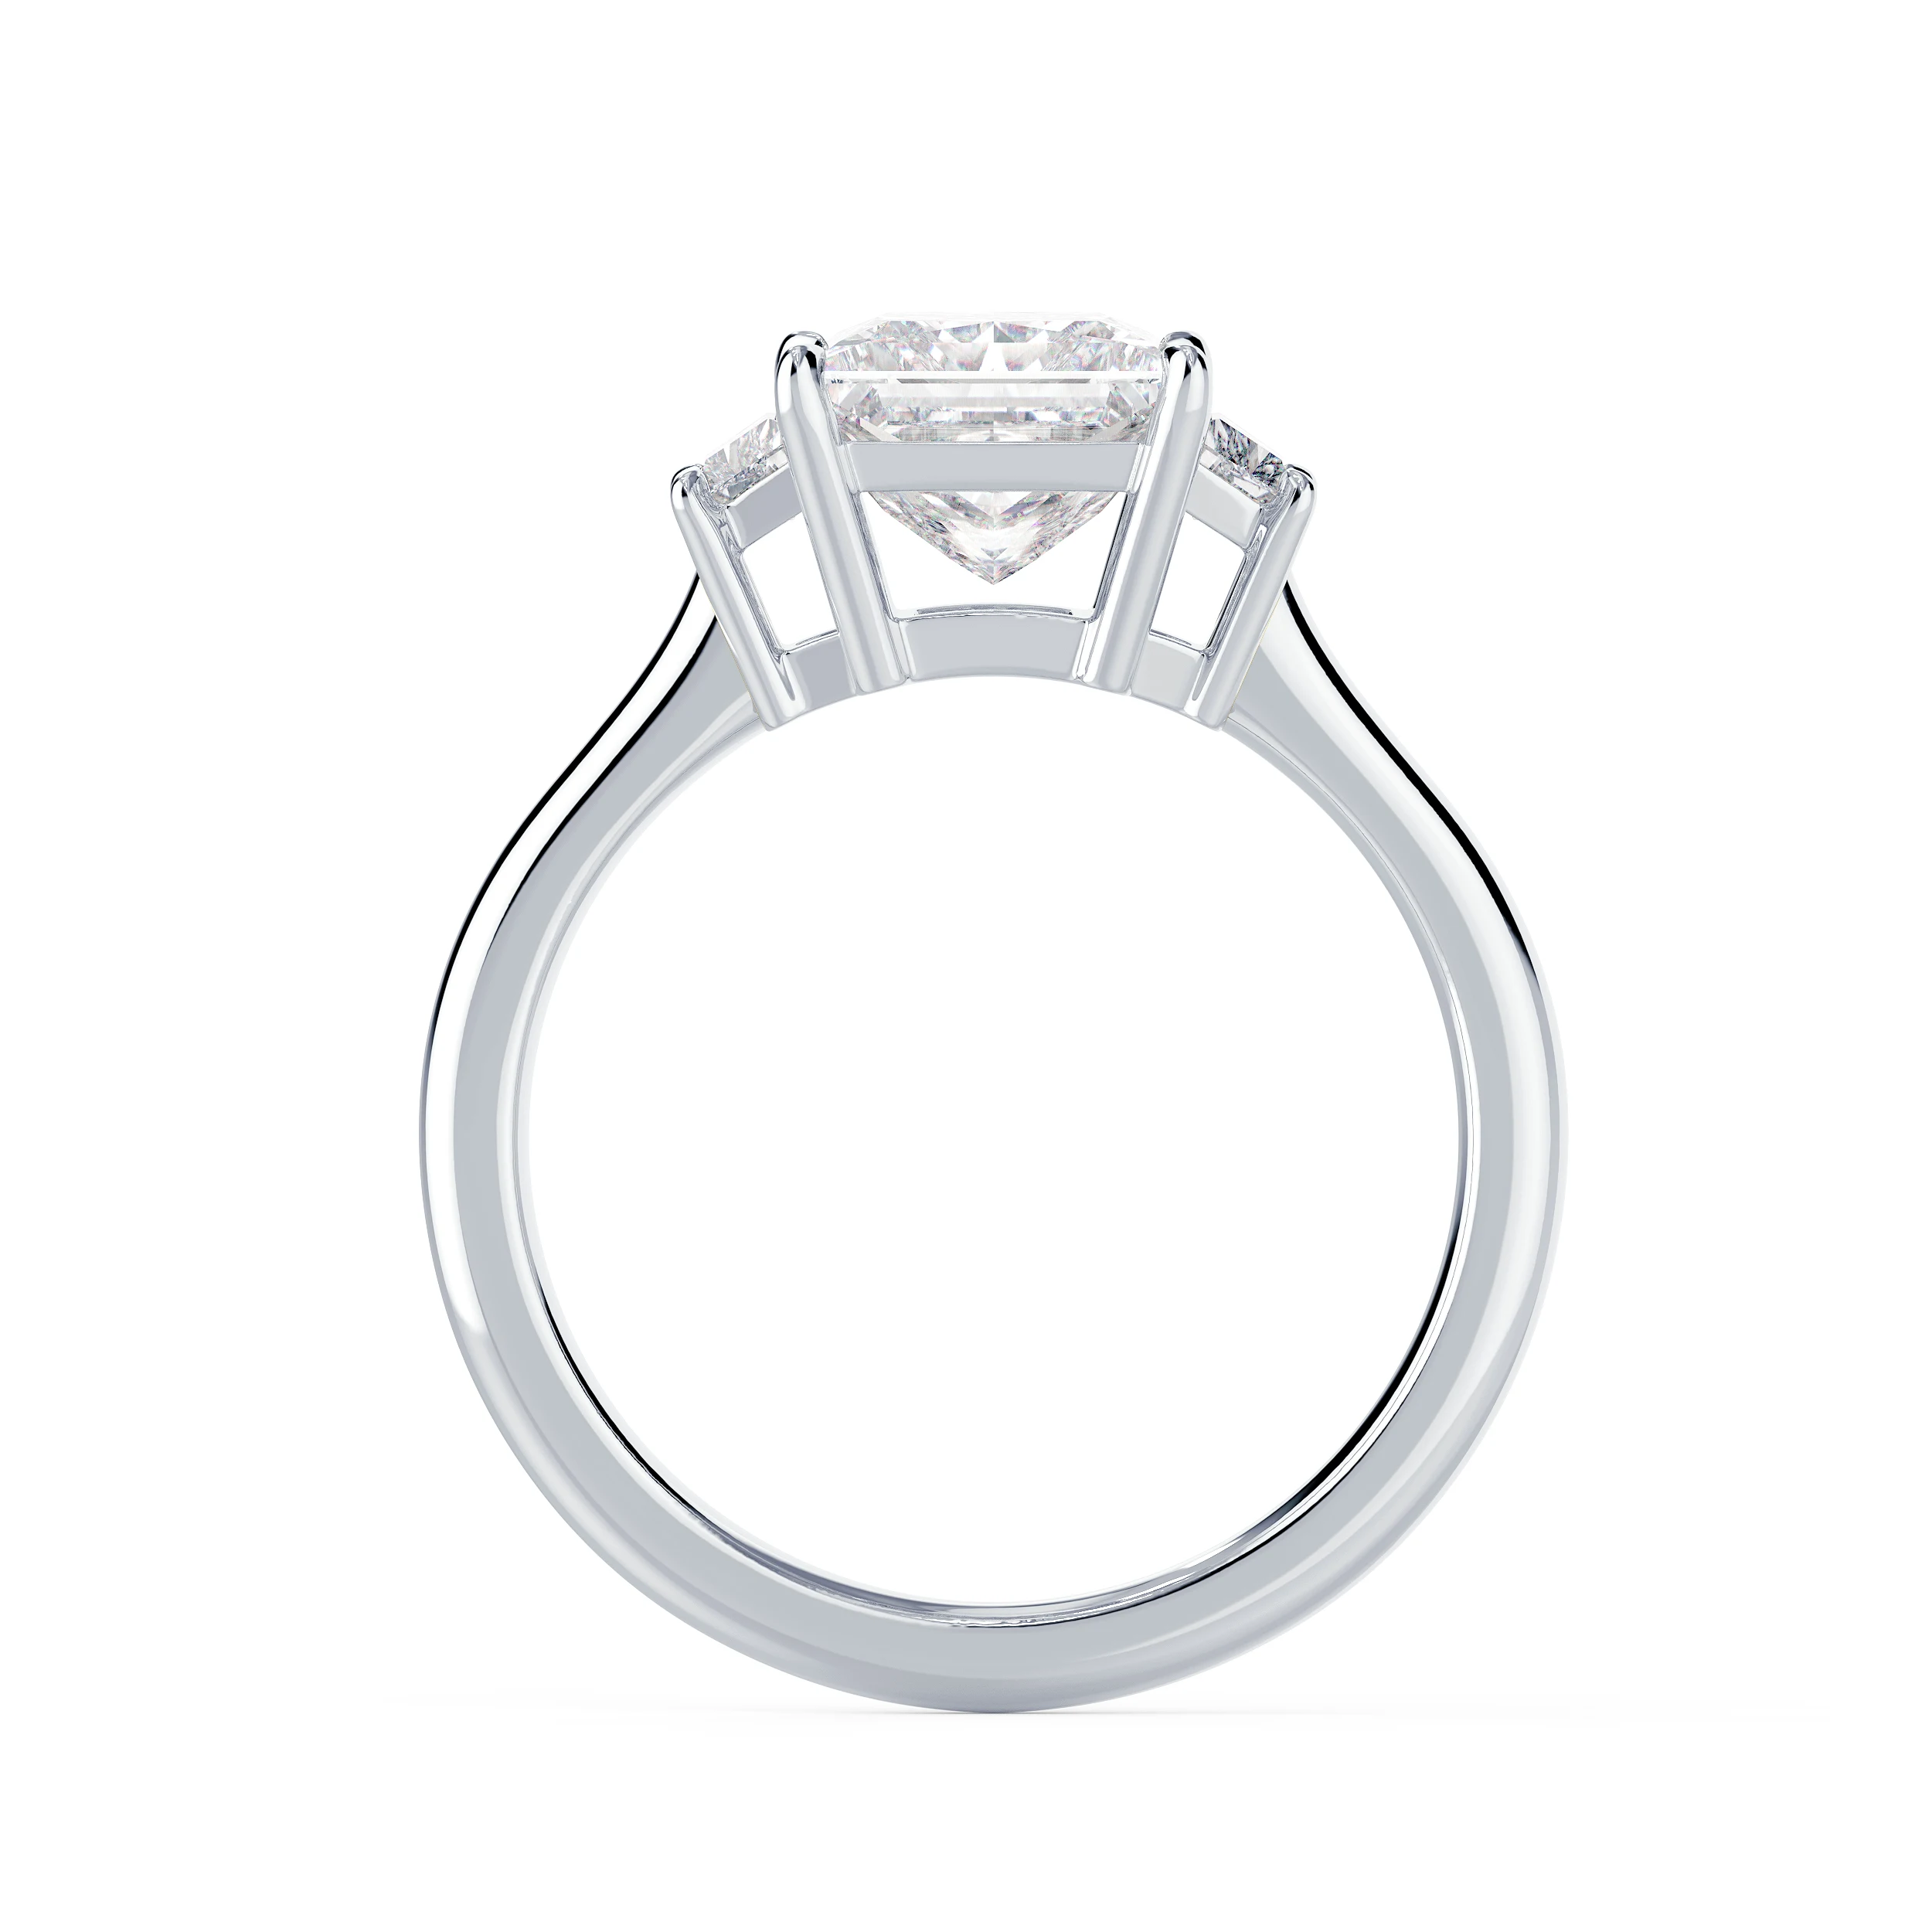 White Gold Princess and Trapezoid Diamond Engagement Ring featuring Lab Diamonds (Profile View)